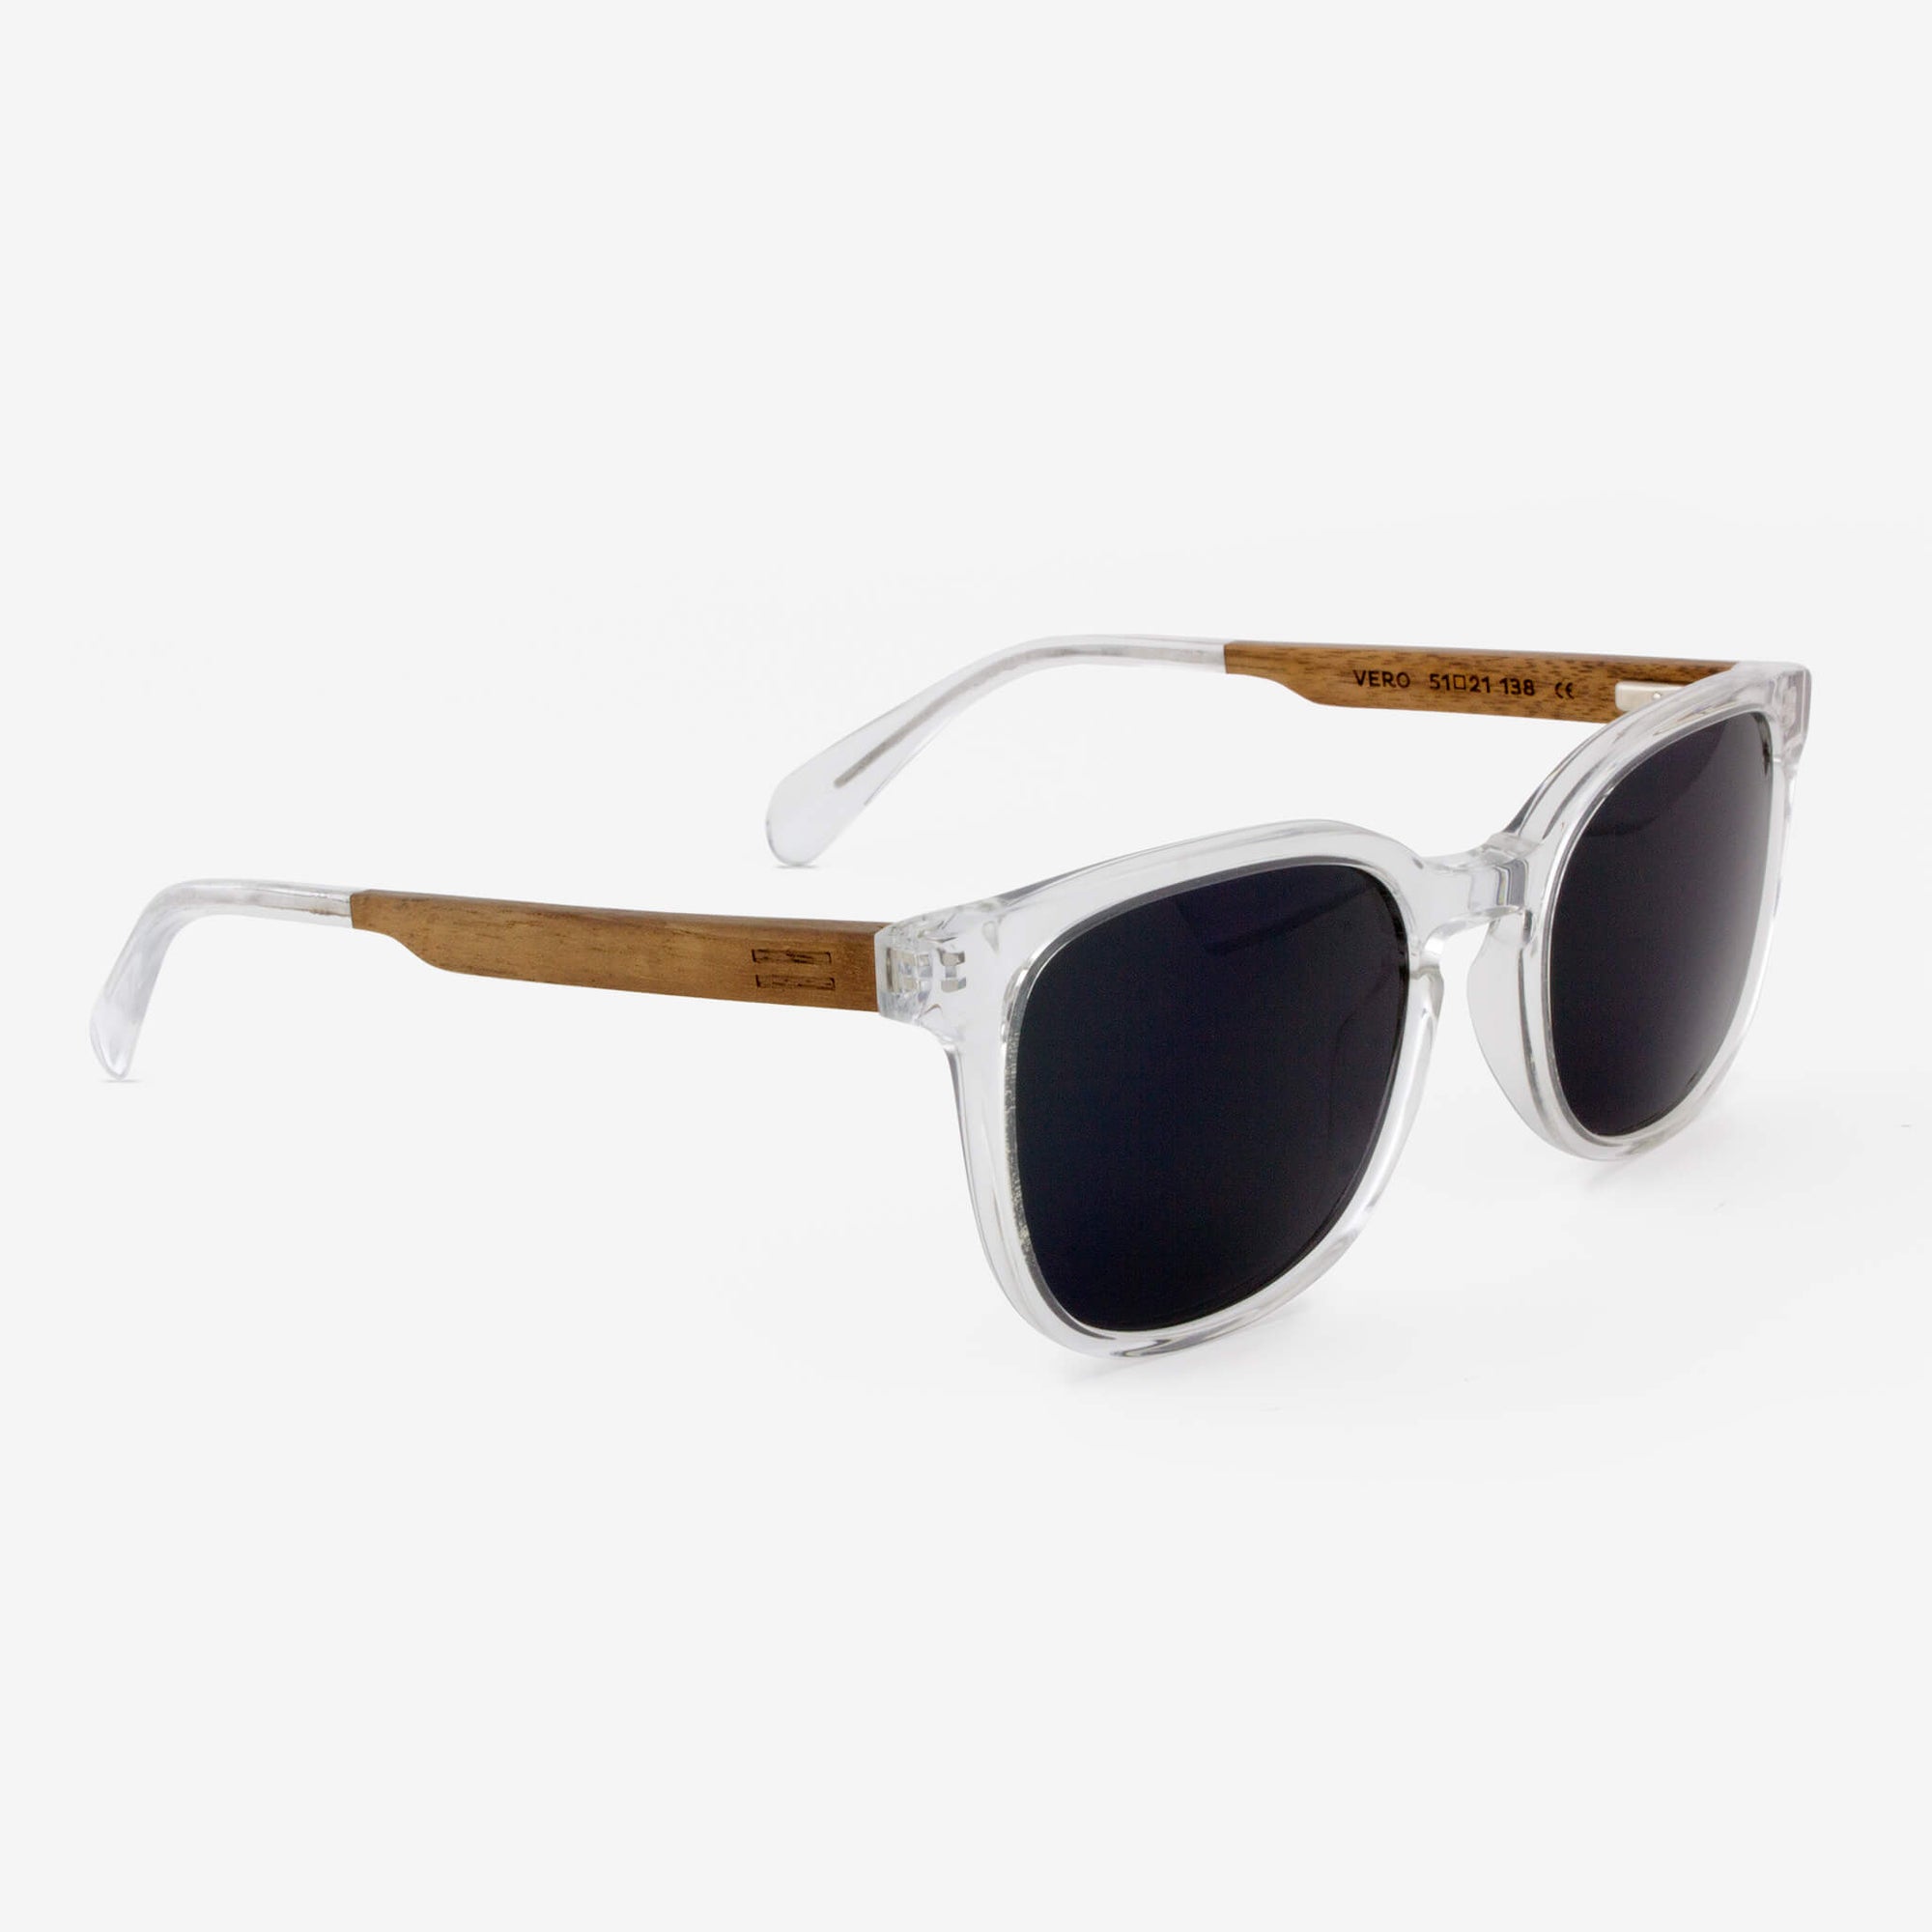 Vero clear acetate and wood sunglasses